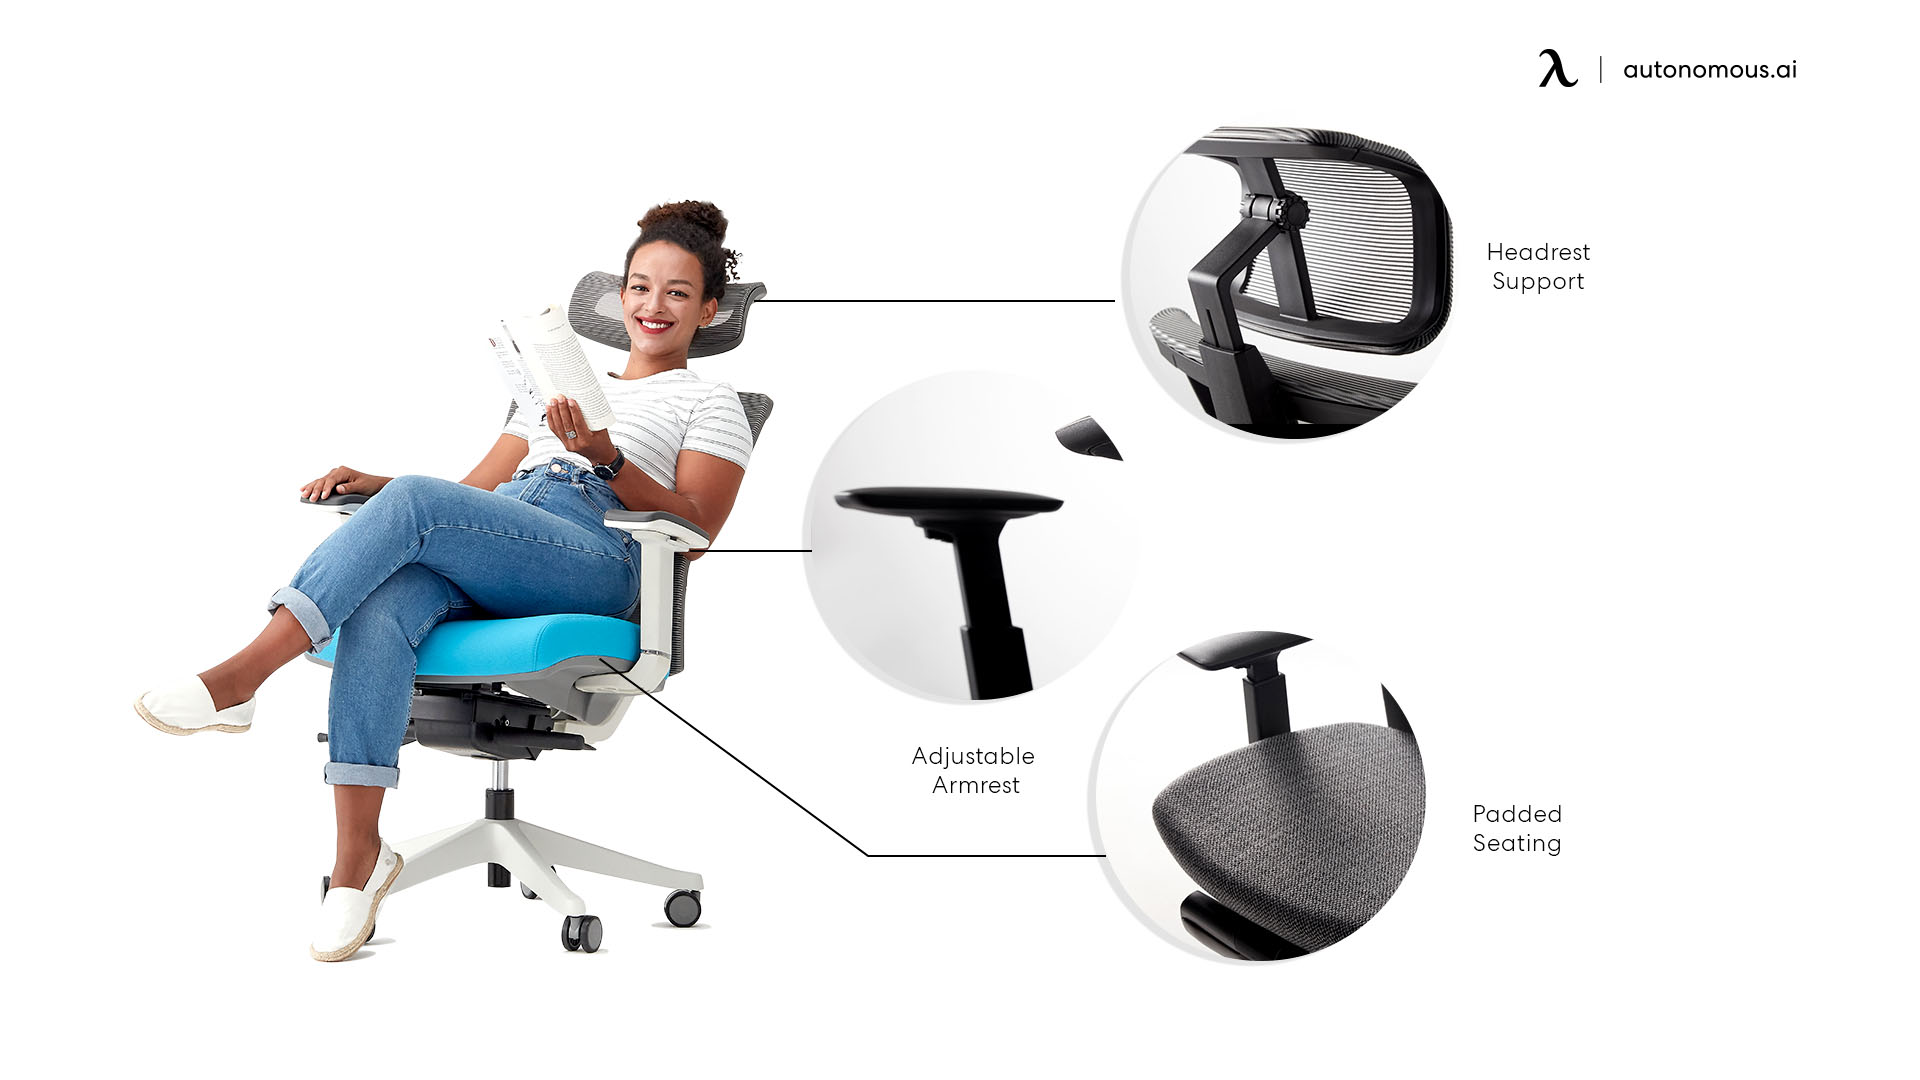 Do You Only Need an Ergonomic Chair